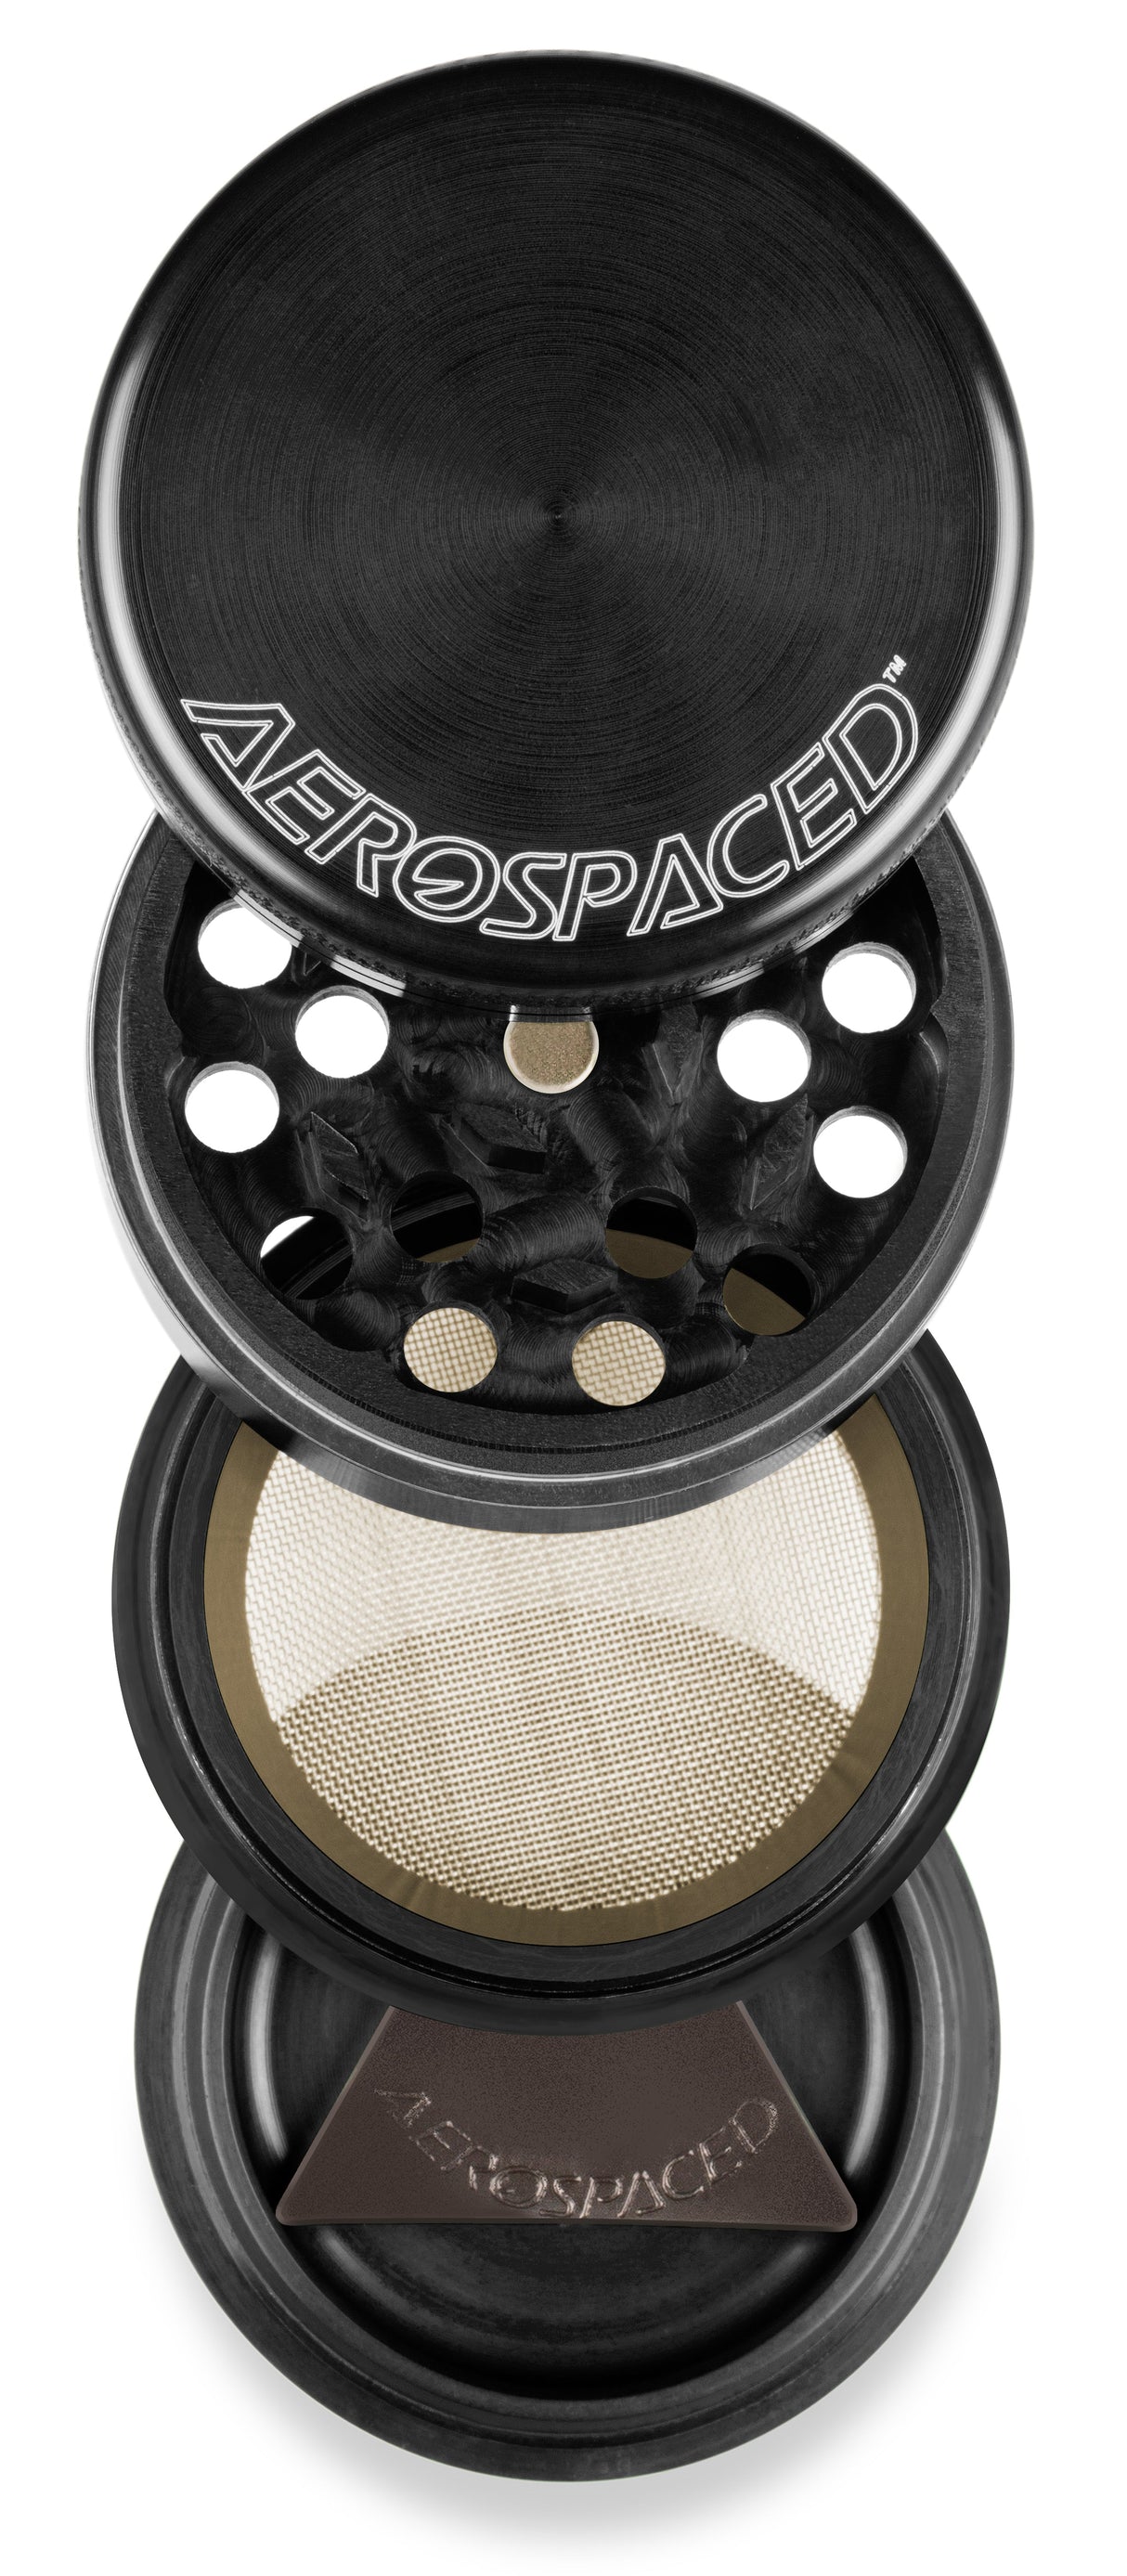 Aerospaced by Higher Standards 4 Piece Grinder, 1.6", Black, Compact Design, Top View